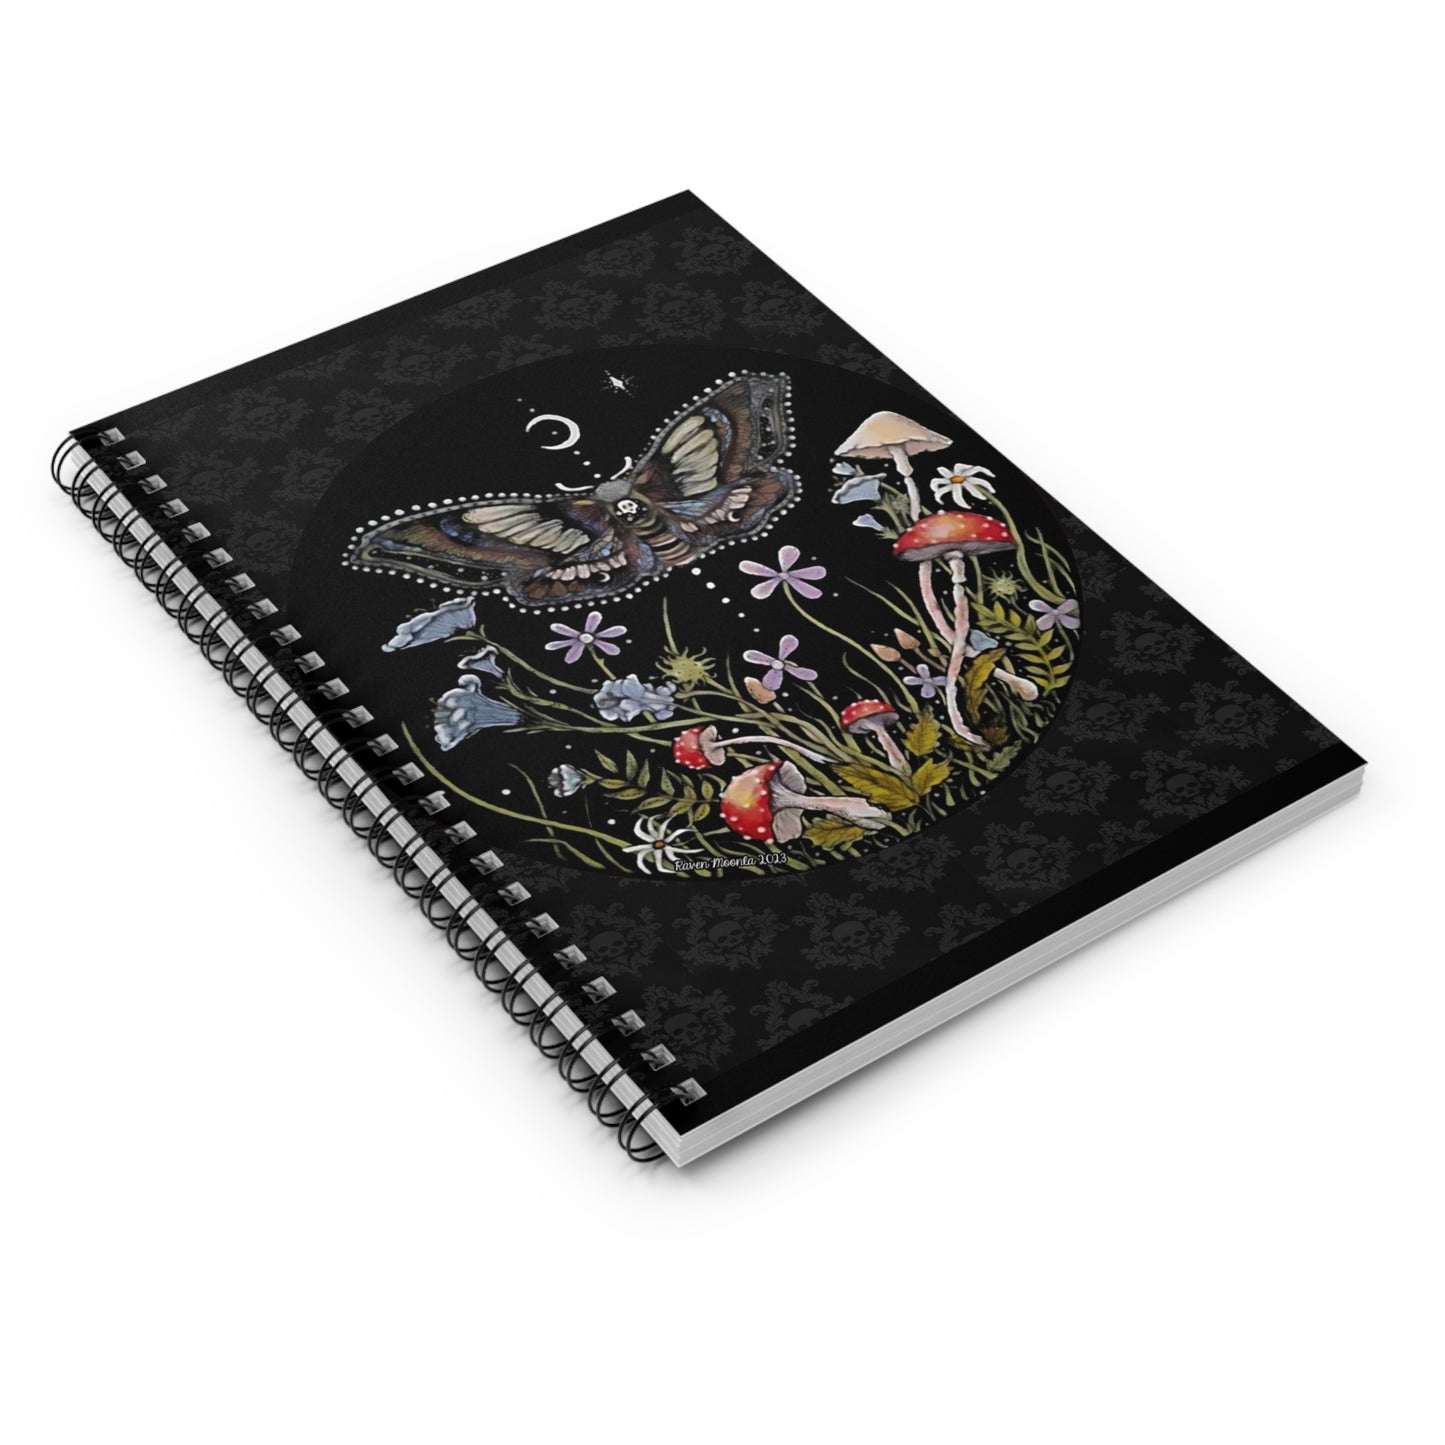 Moth, Mushroom, and Floral Art by Raven Moonla - Spiral Notebook - Ruled Line